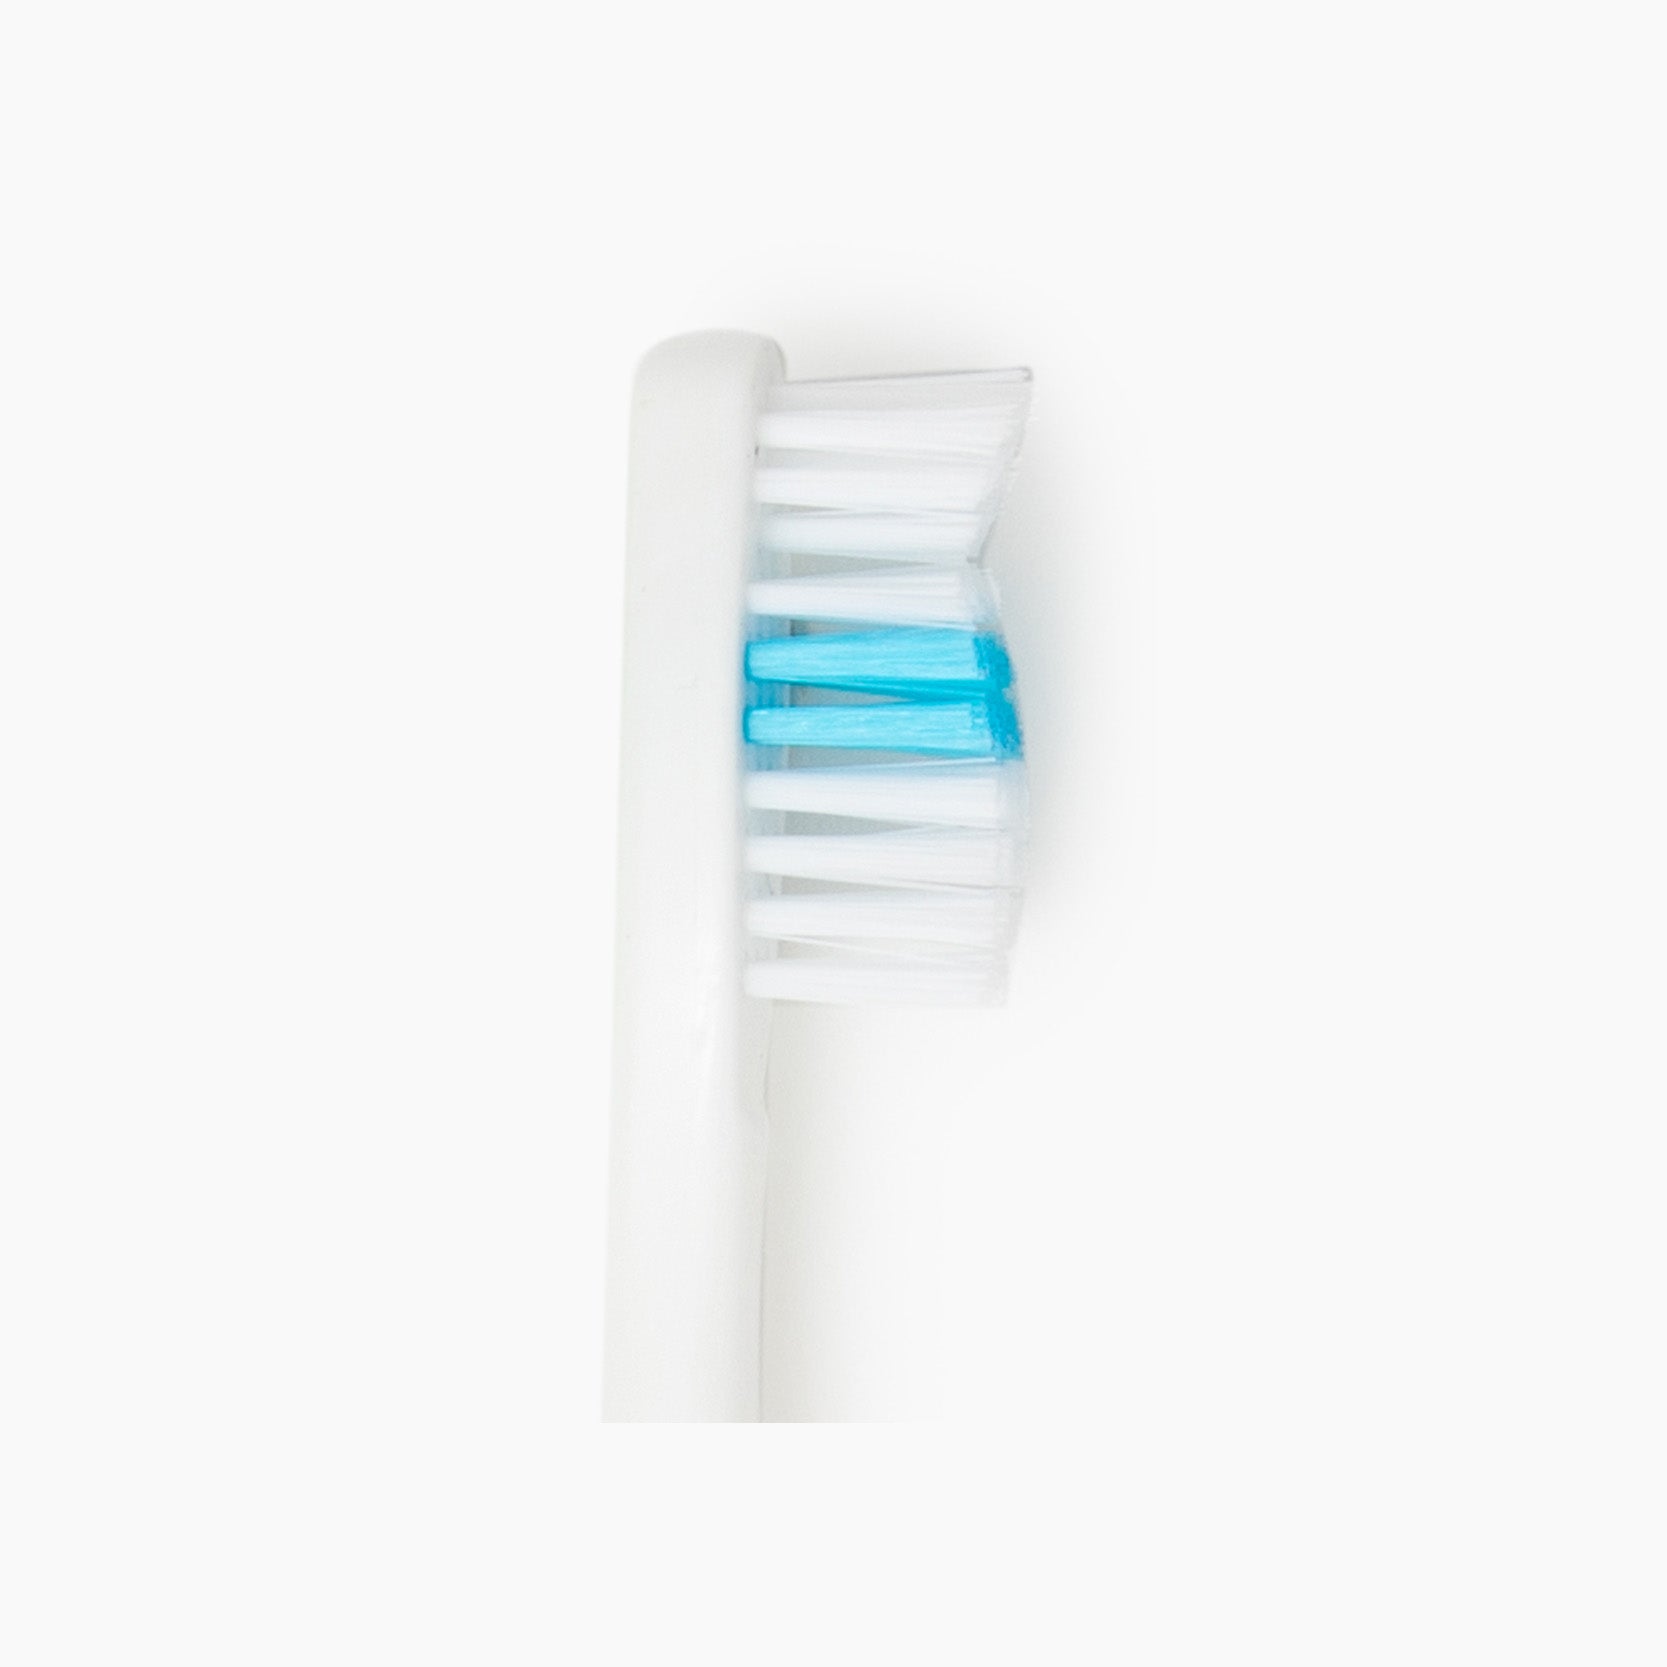 Ultra Lux Toothbrush - Imprinted (144 pc)